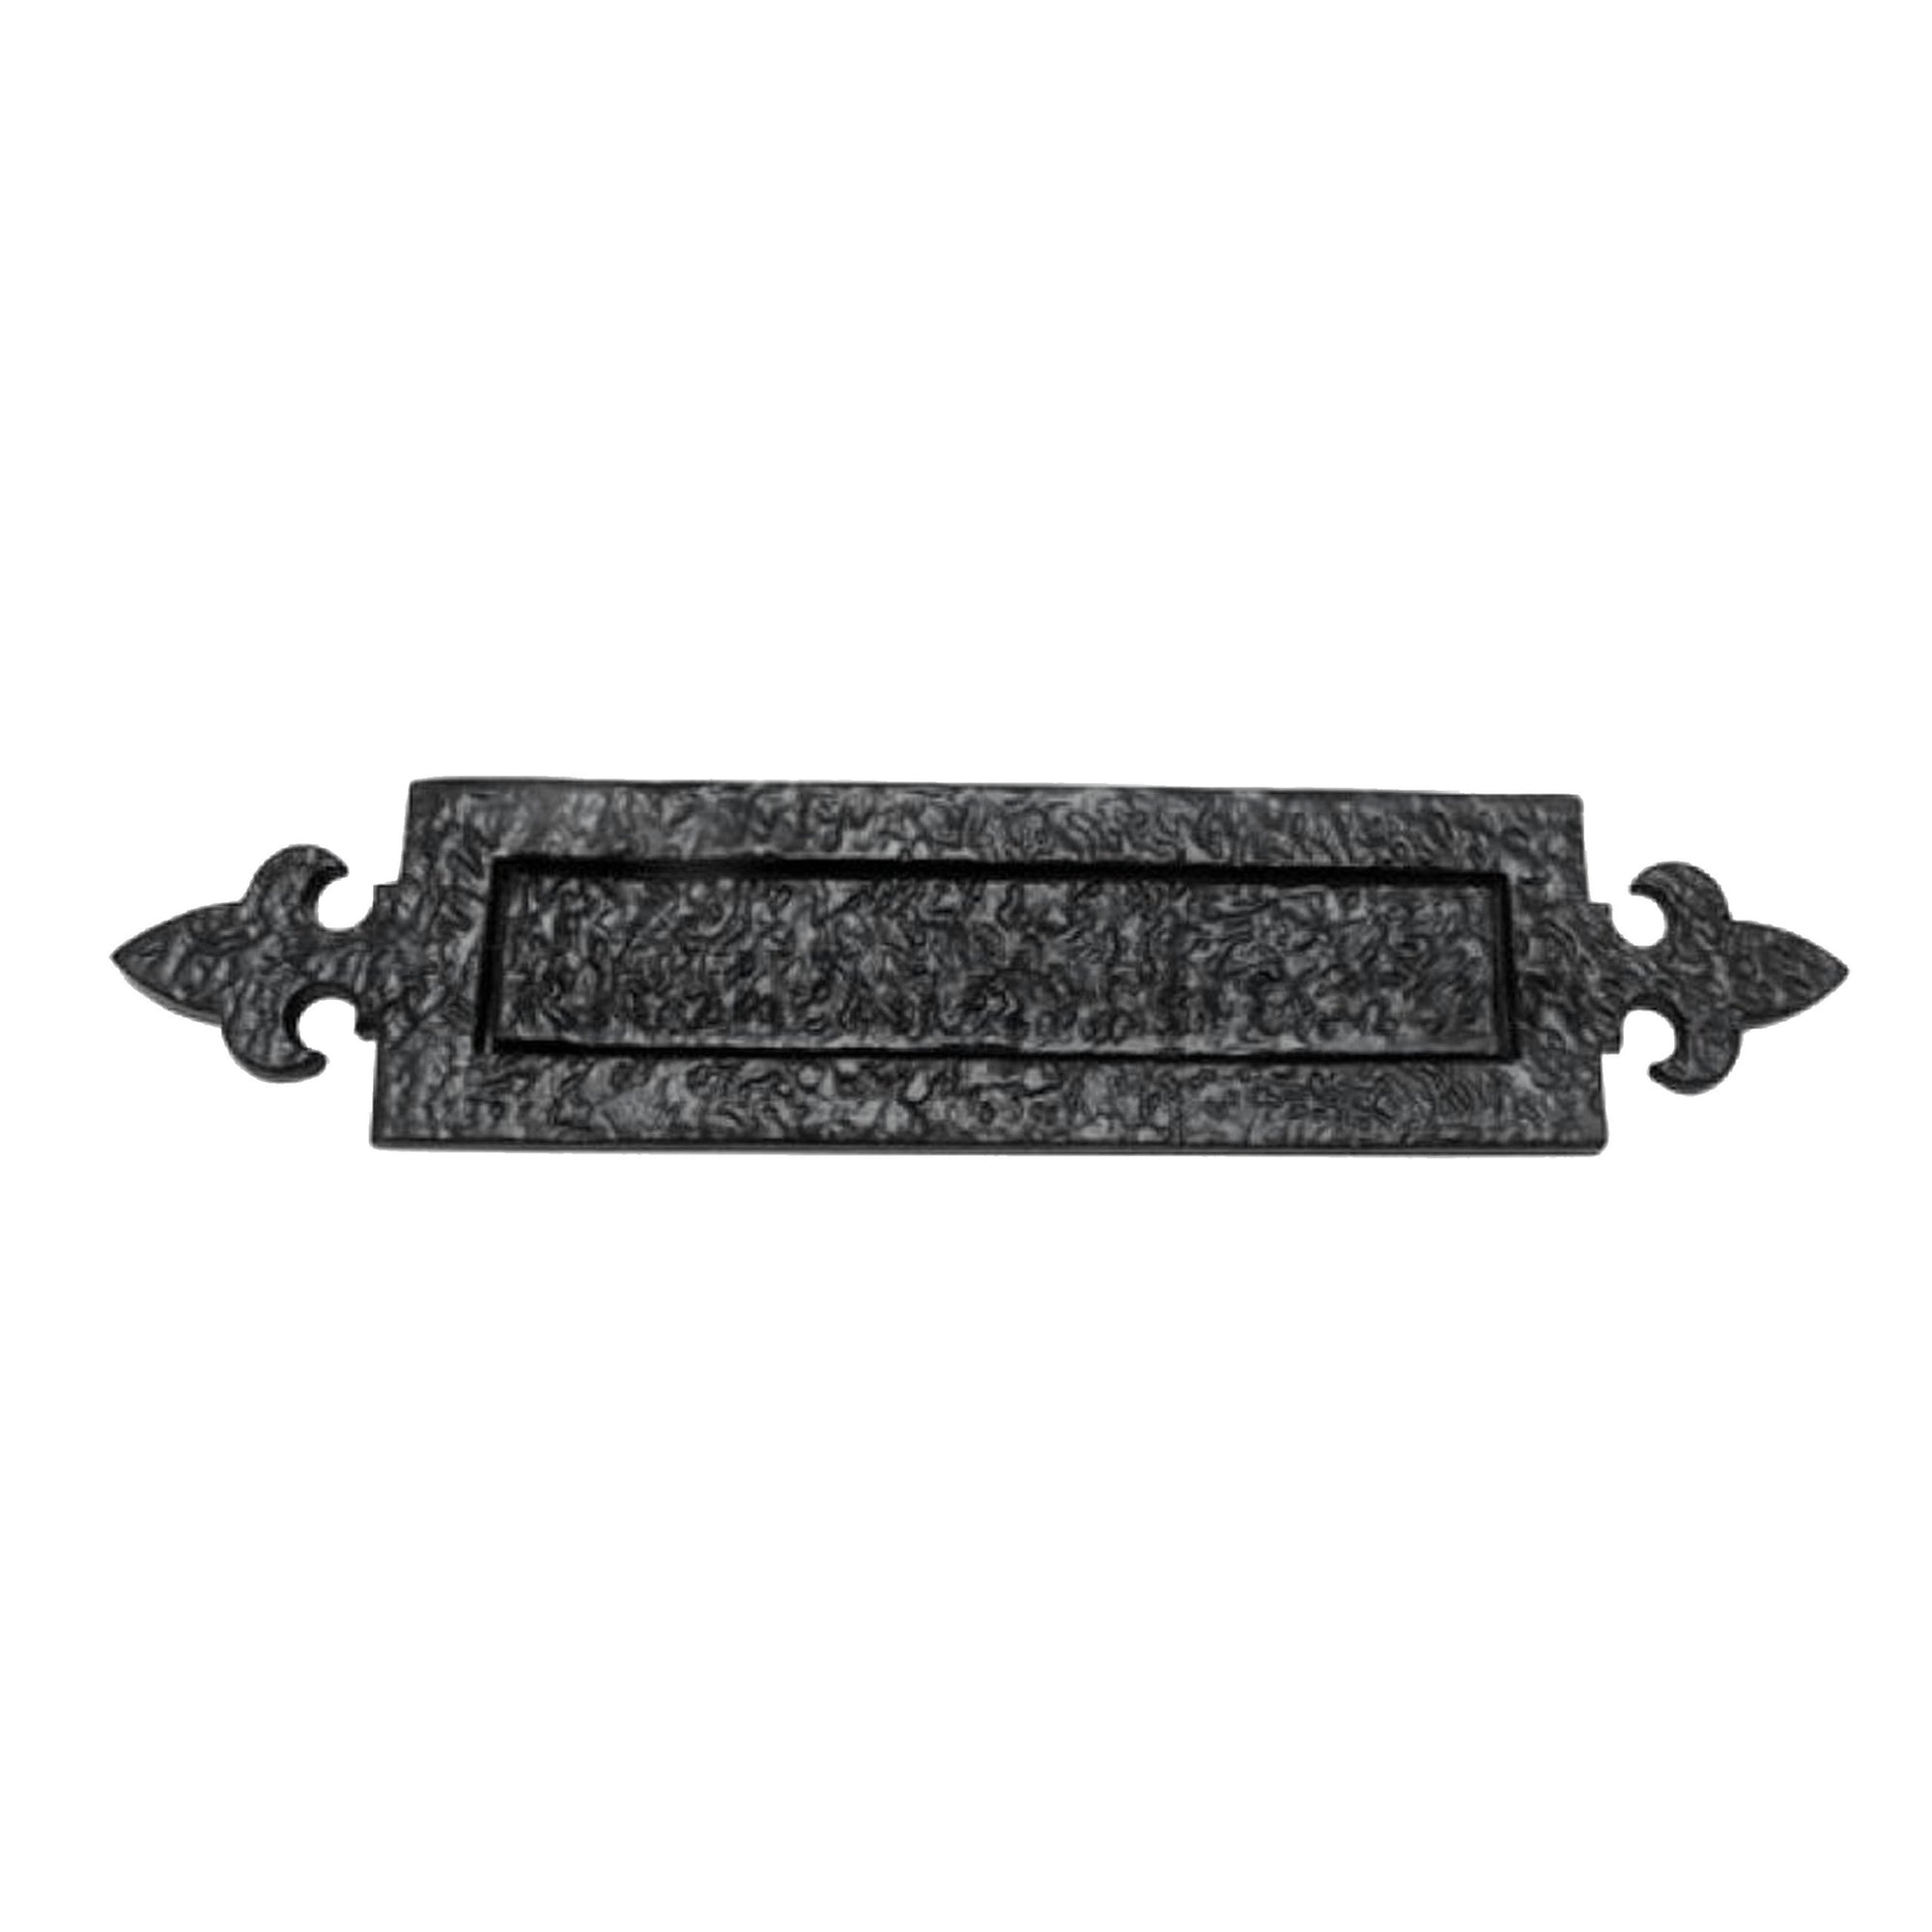 Cast Iron Letter Plate - Black Powder Coated